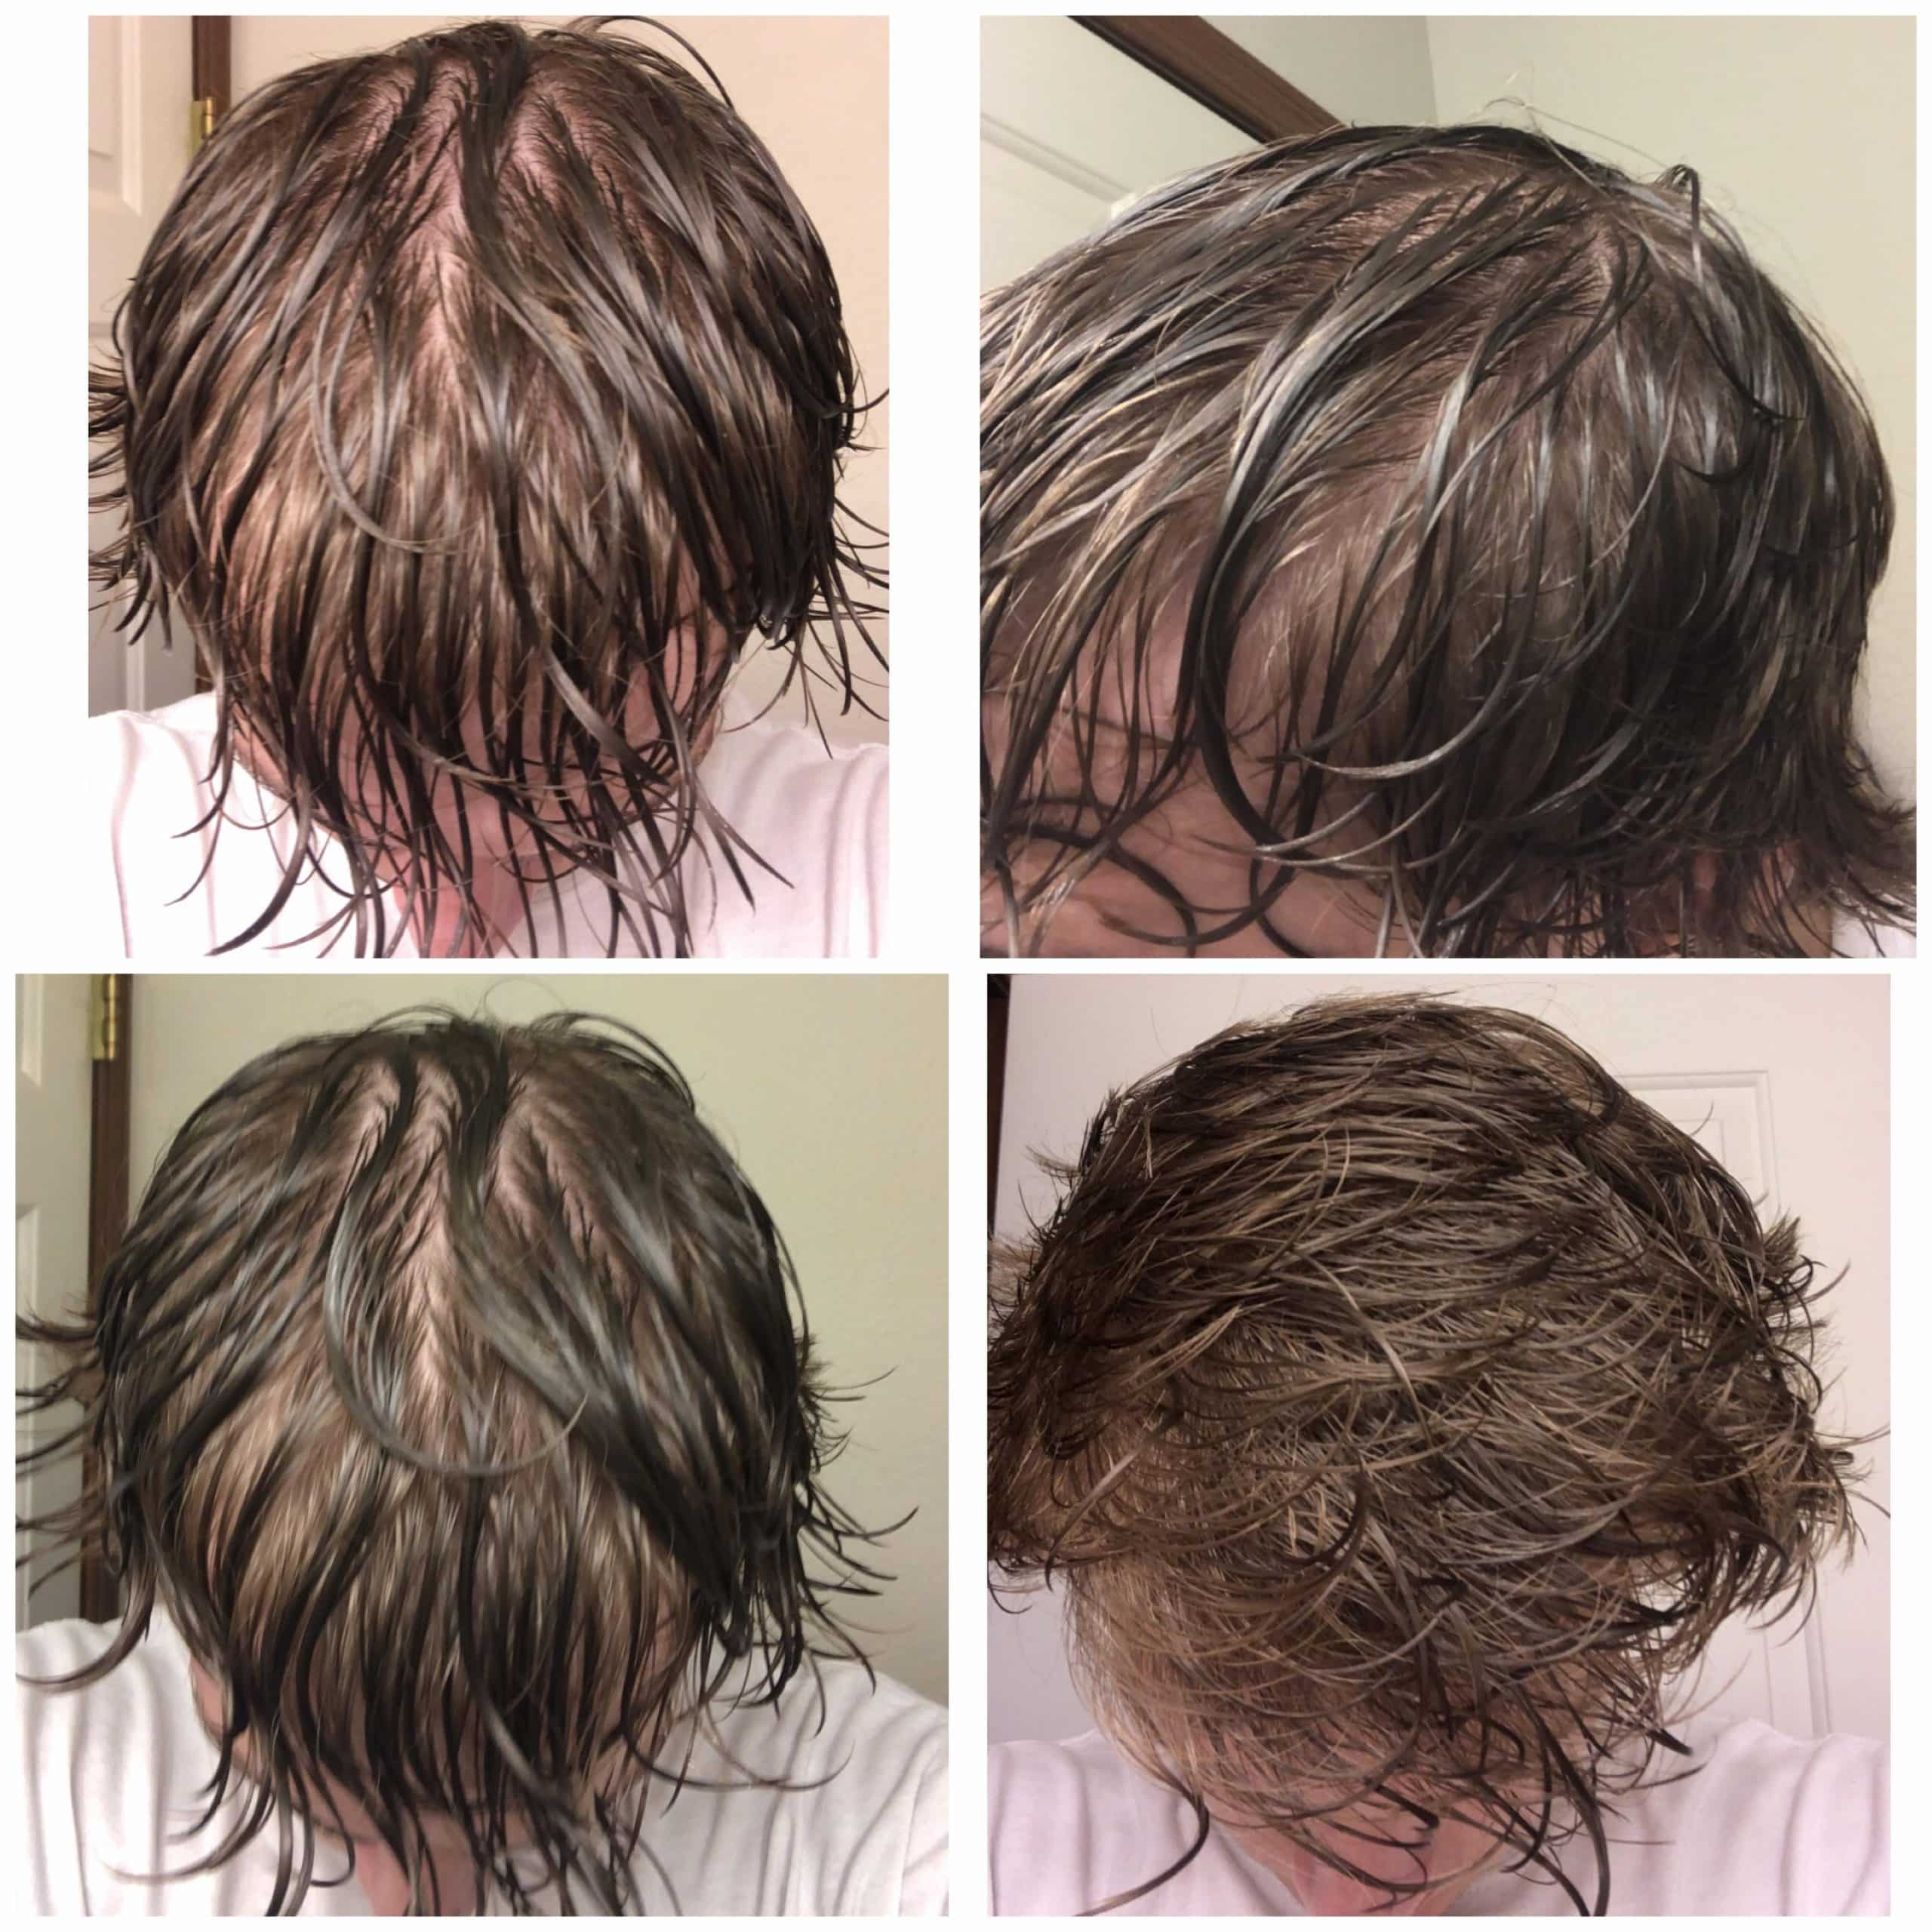 Hair has gotten more thin the last few months. When hair is wet/soaked ...